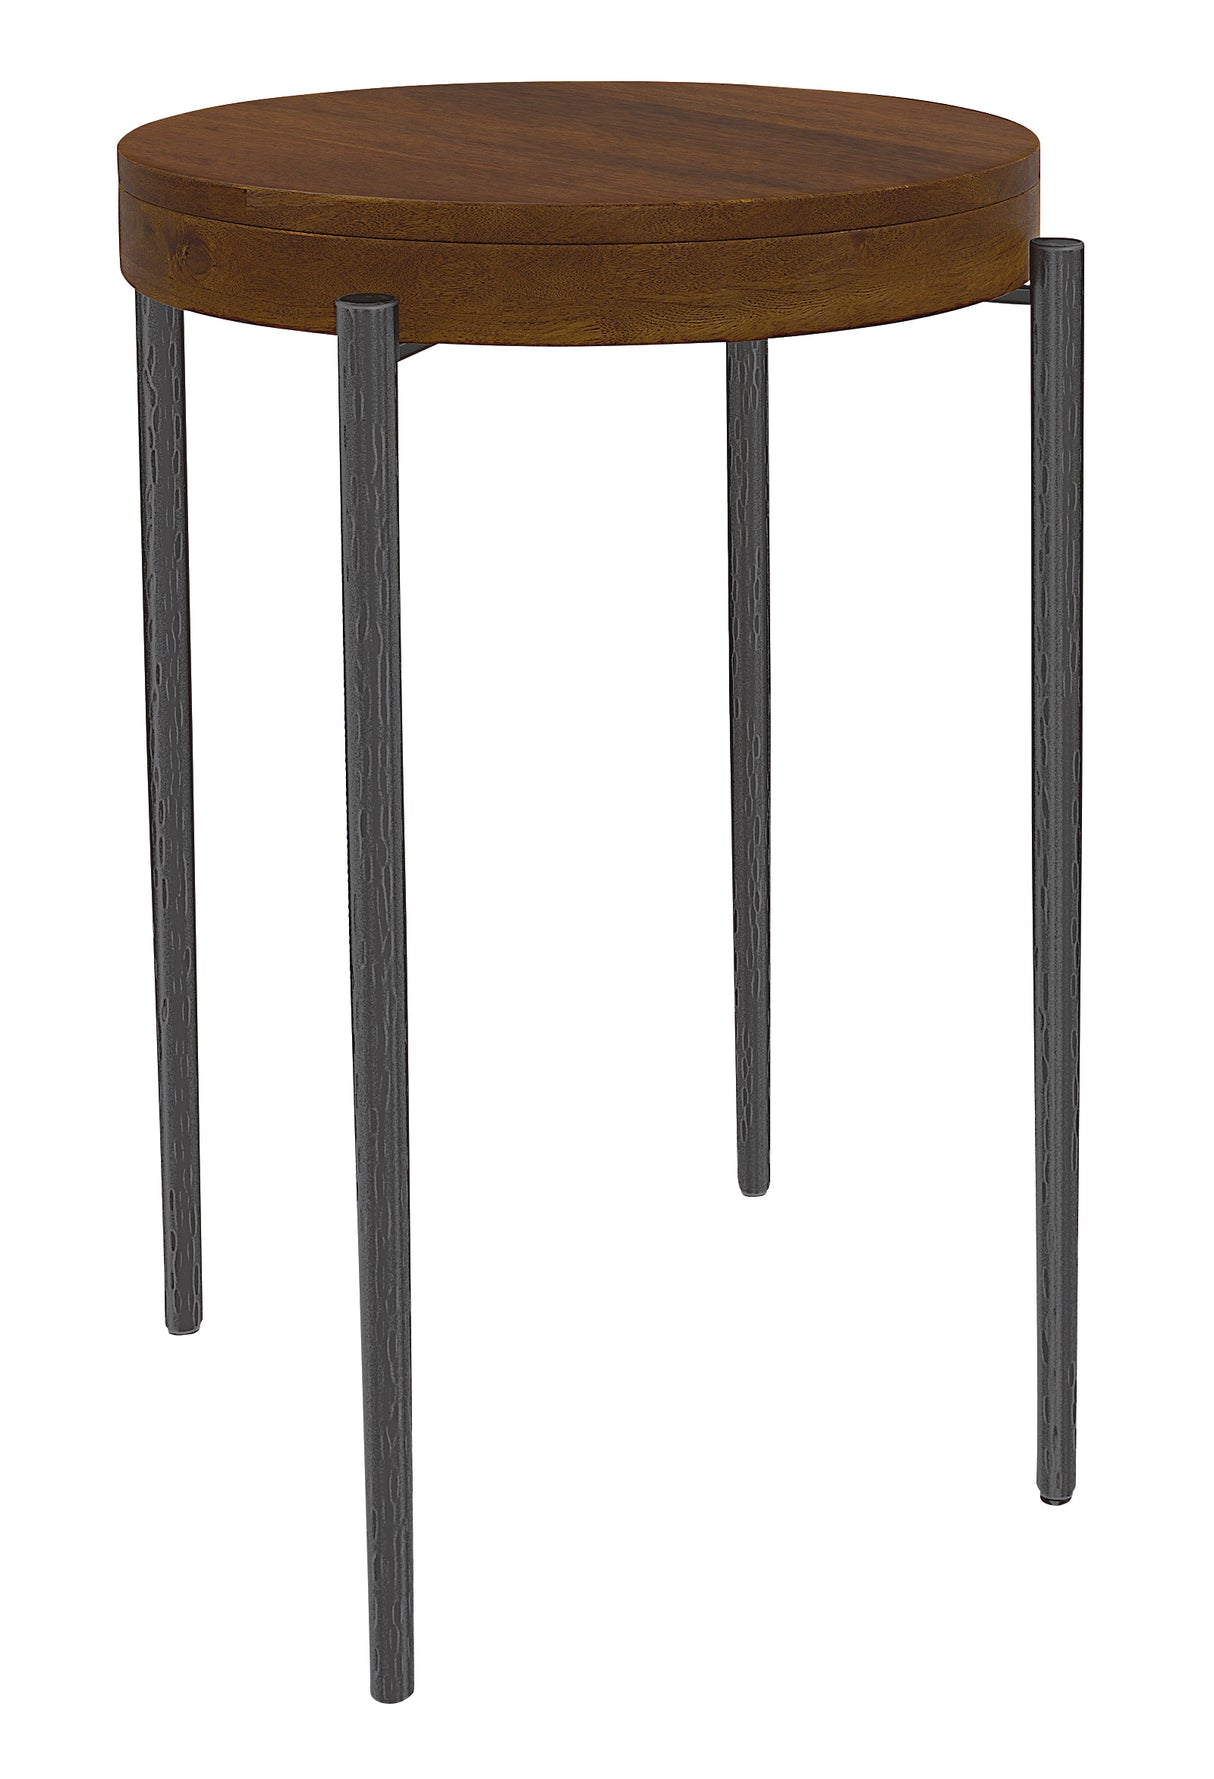 Hekman 26007 Bedford Park 17.25in. x 17.25in. x 25in. End Table